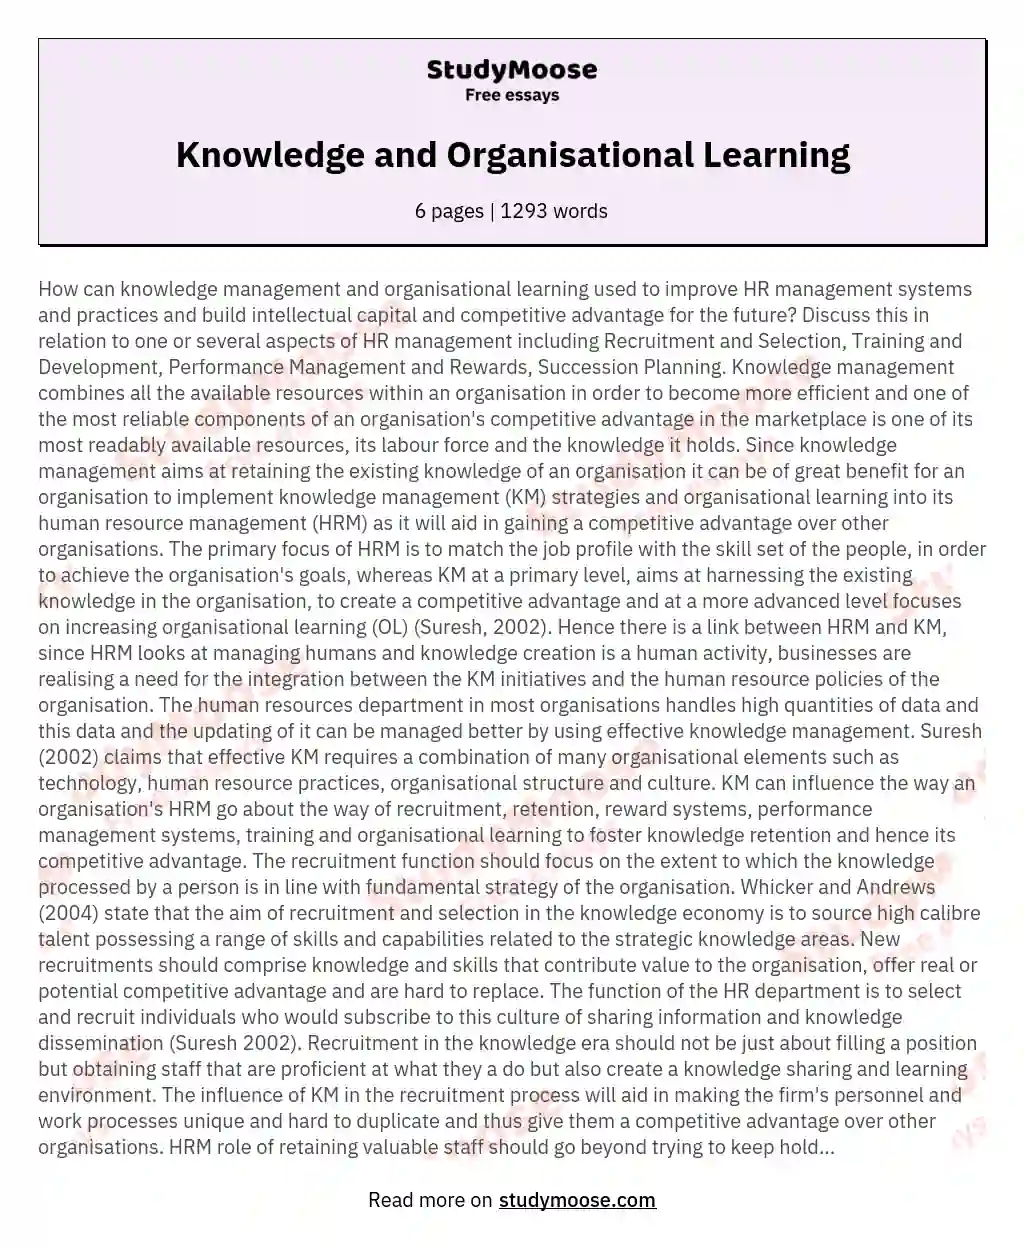 Knowledge and Organisational Learning essay